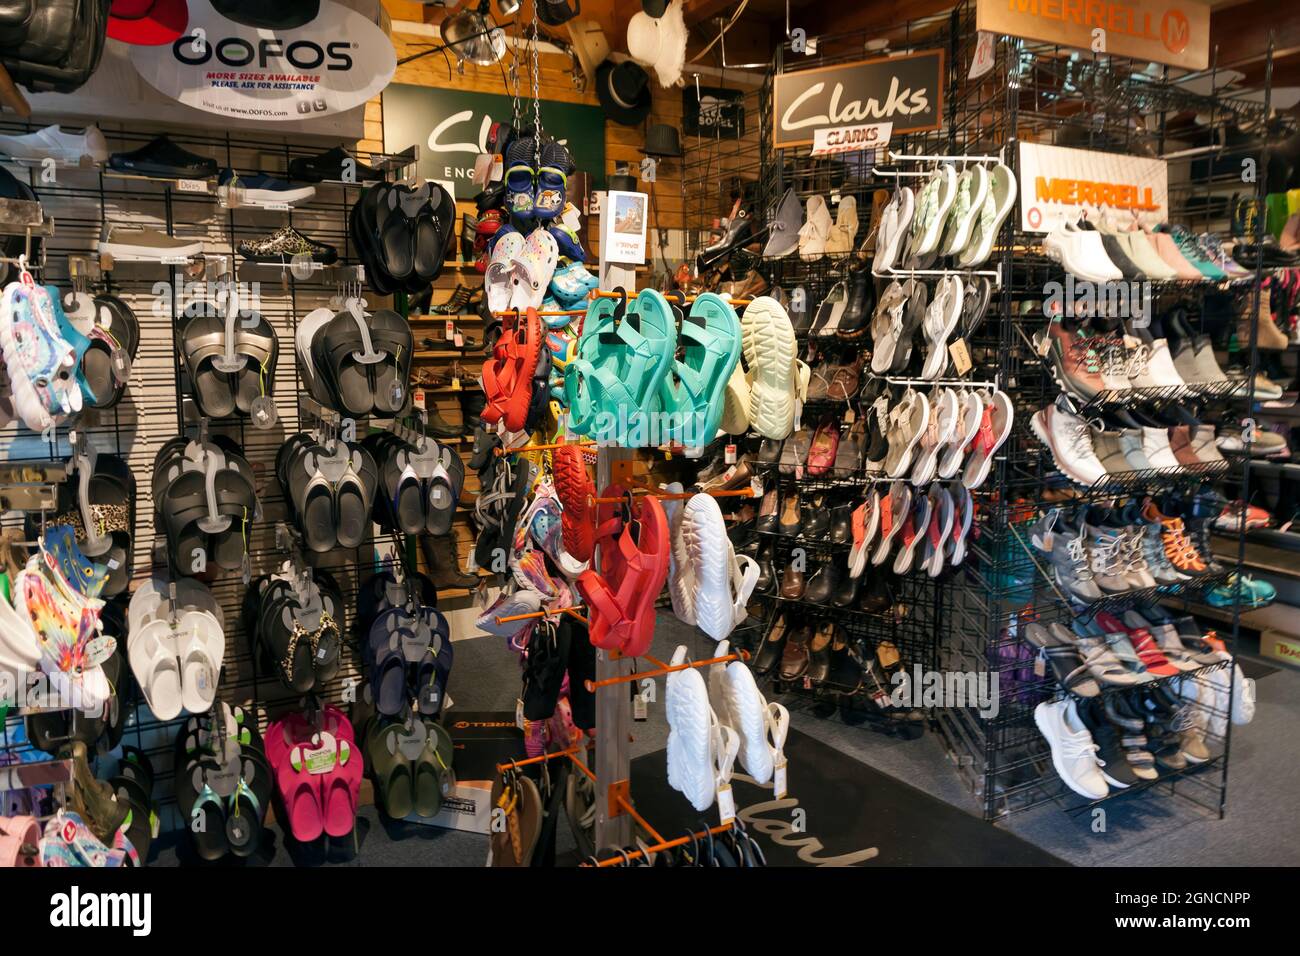 Shoe store interior displaying sandals, shoes, and sneakers of various brands. Stock Photo